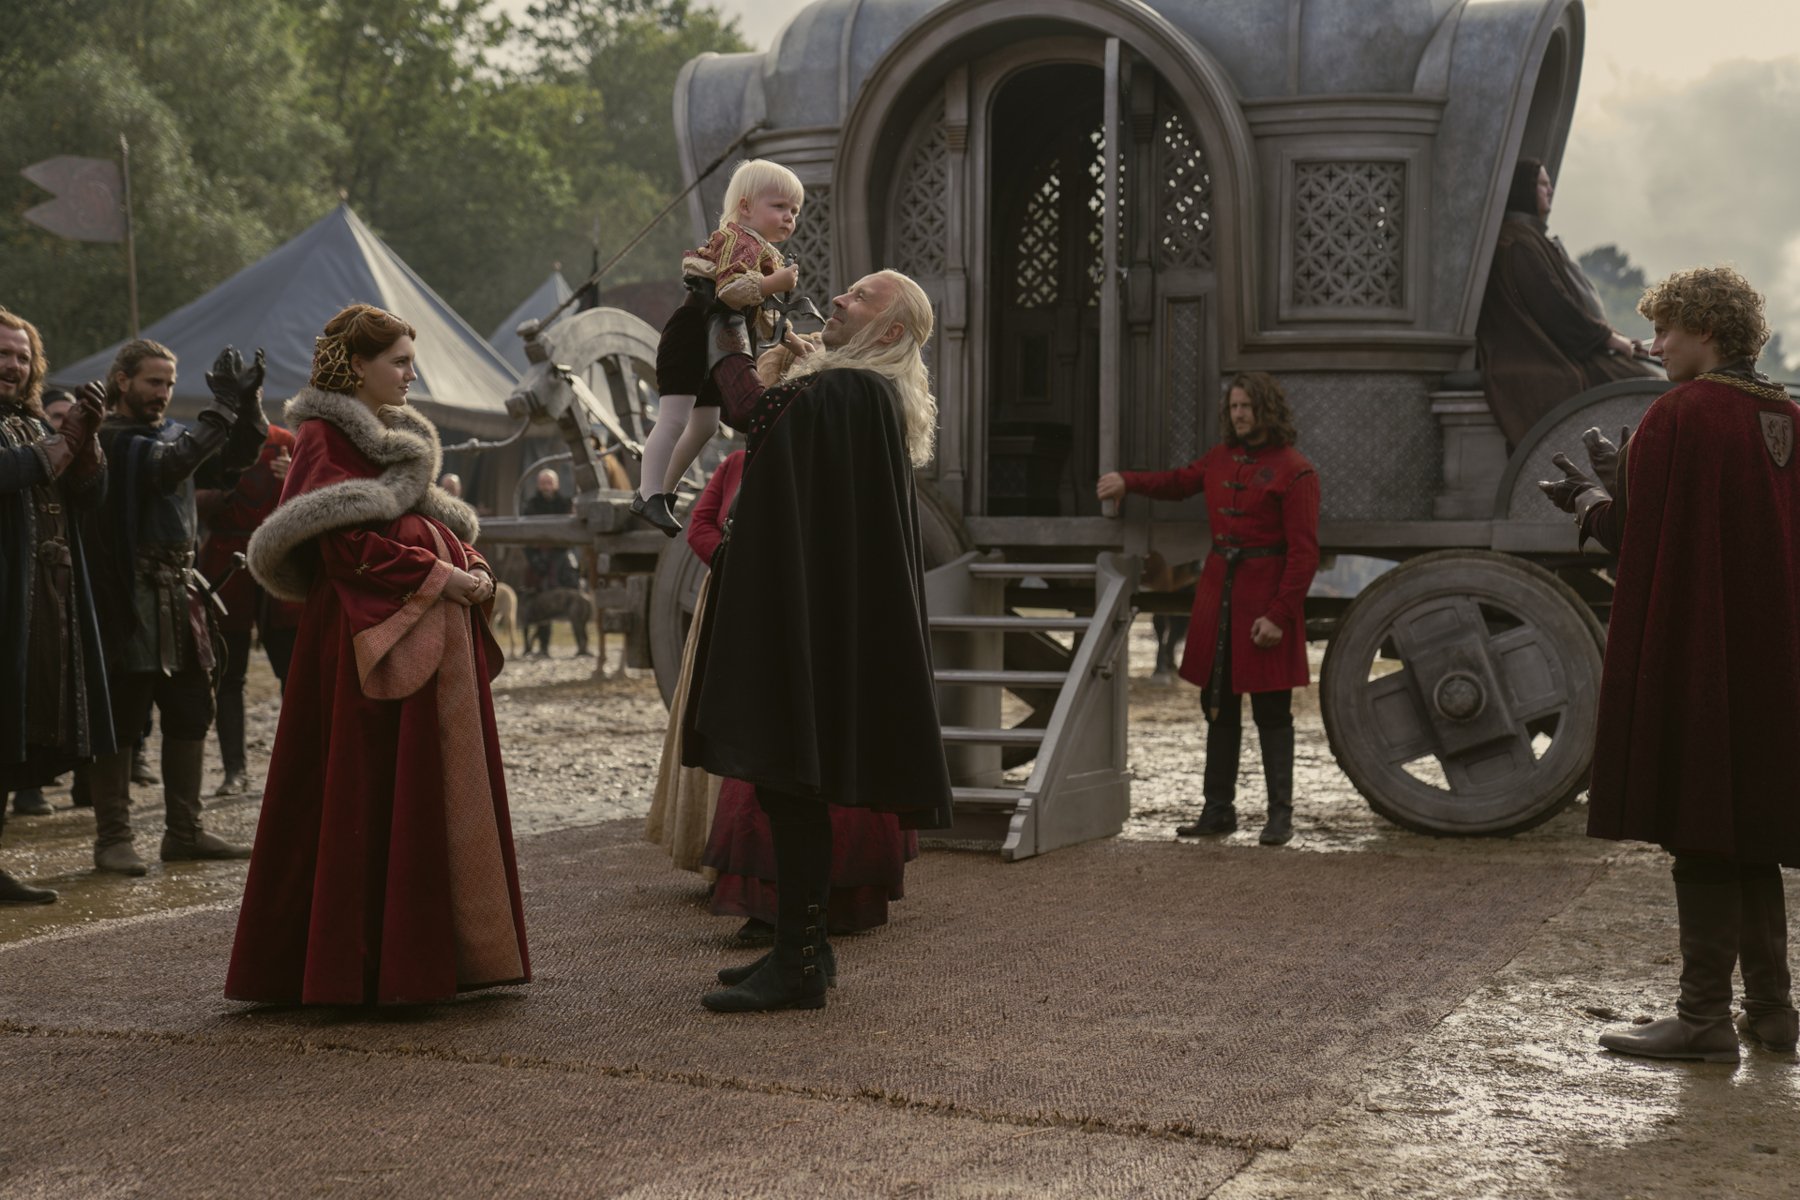 Emily Carey as Alicent Hightower and Paddy Considine as King Viserys. They're standing outside of a carriage and Viserys is holding up their child. His son may present a problem for Rhaenyra heading into 'House of the Dragon' Episode 4.